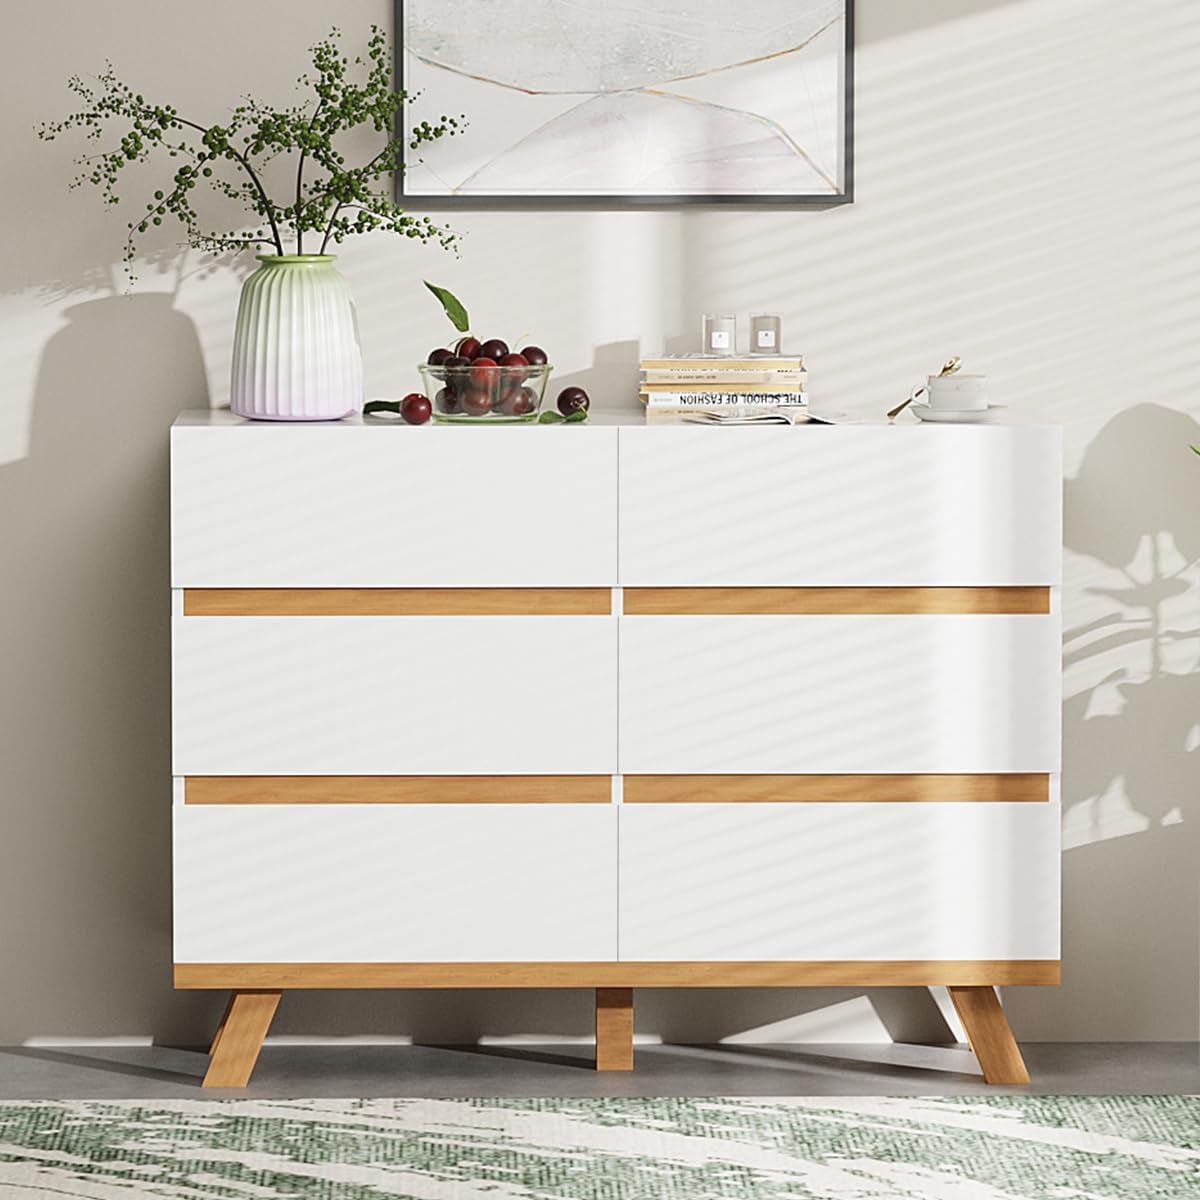 White Wooden Dresser with 6 Deep Drawers, 6 Chest of Drawers Double Dressers, Modern Storage Cabinet for Bedroom, Living Room, Hallway, Entryway - White